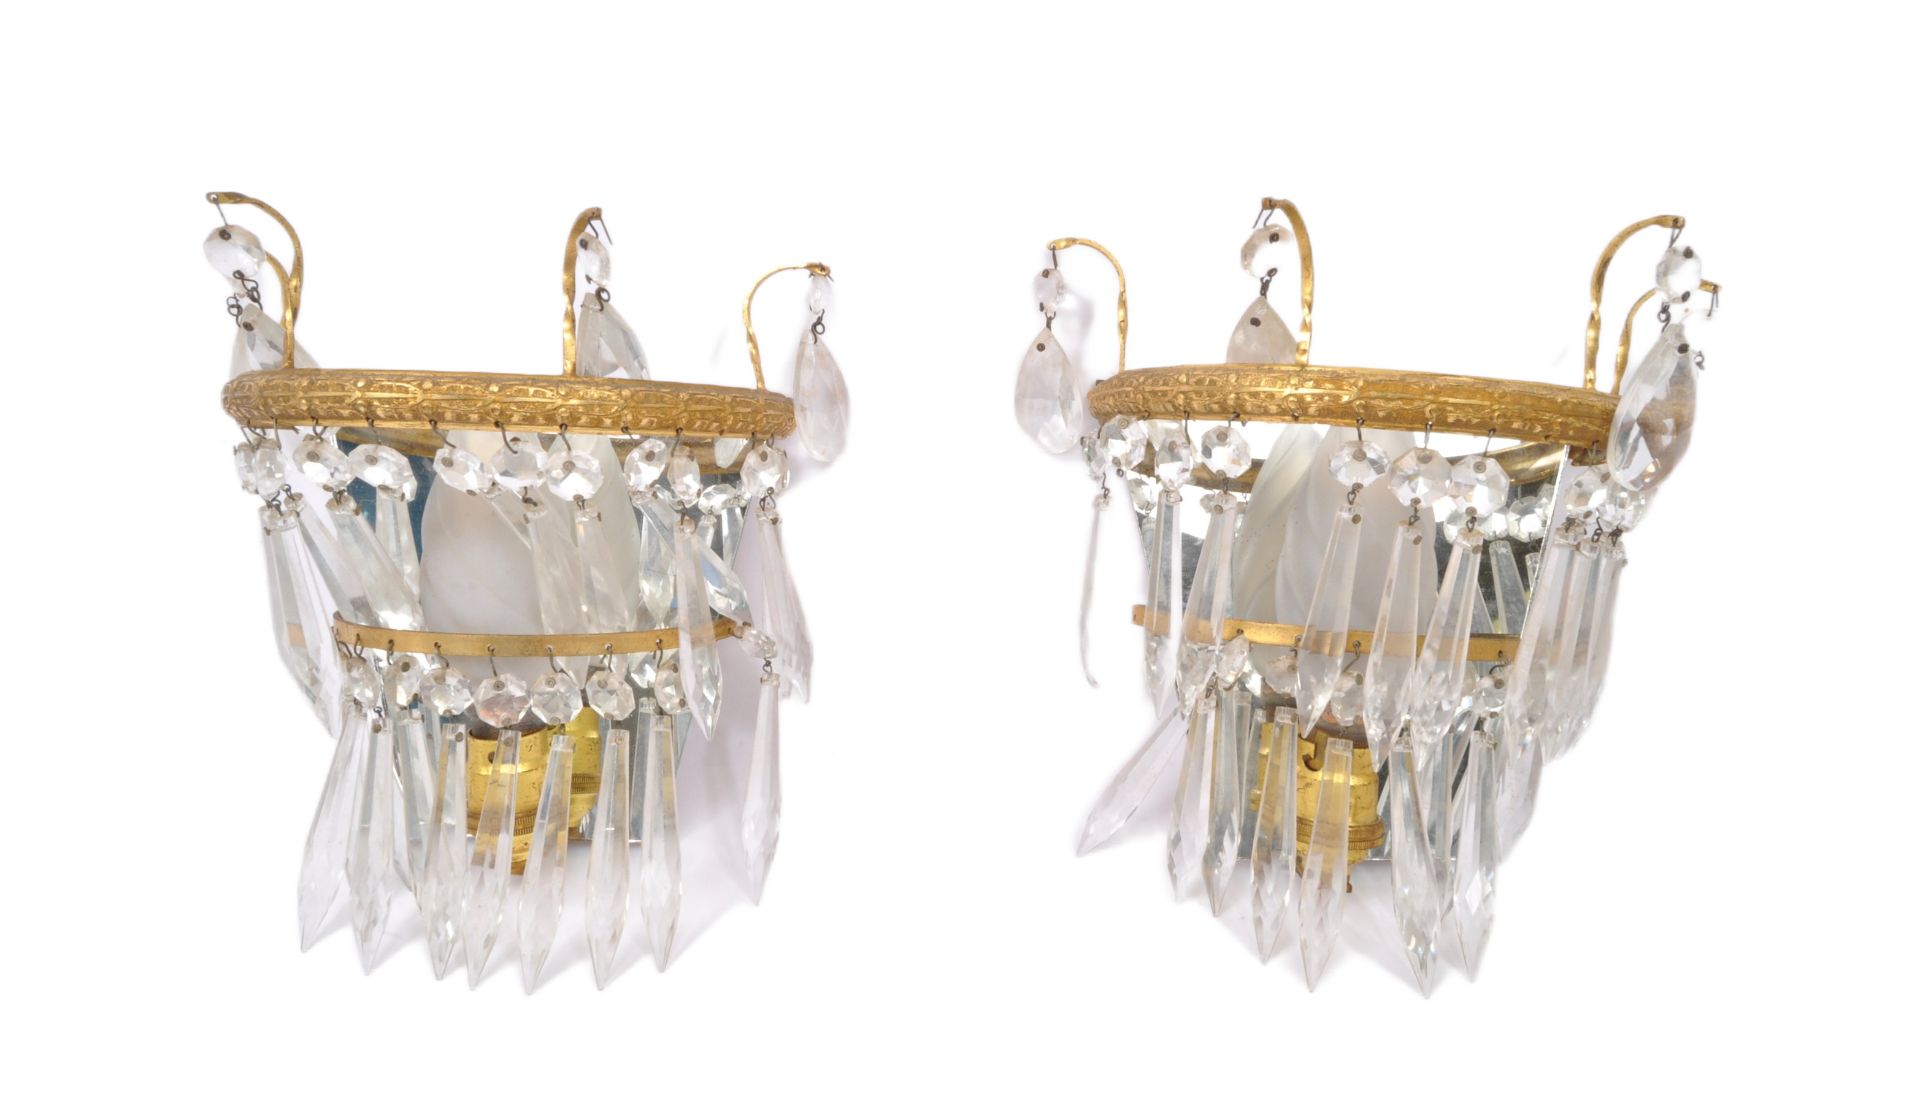 PAIR OF EARLY 20TH CENTURY GILT METAL WALL LIGHTS